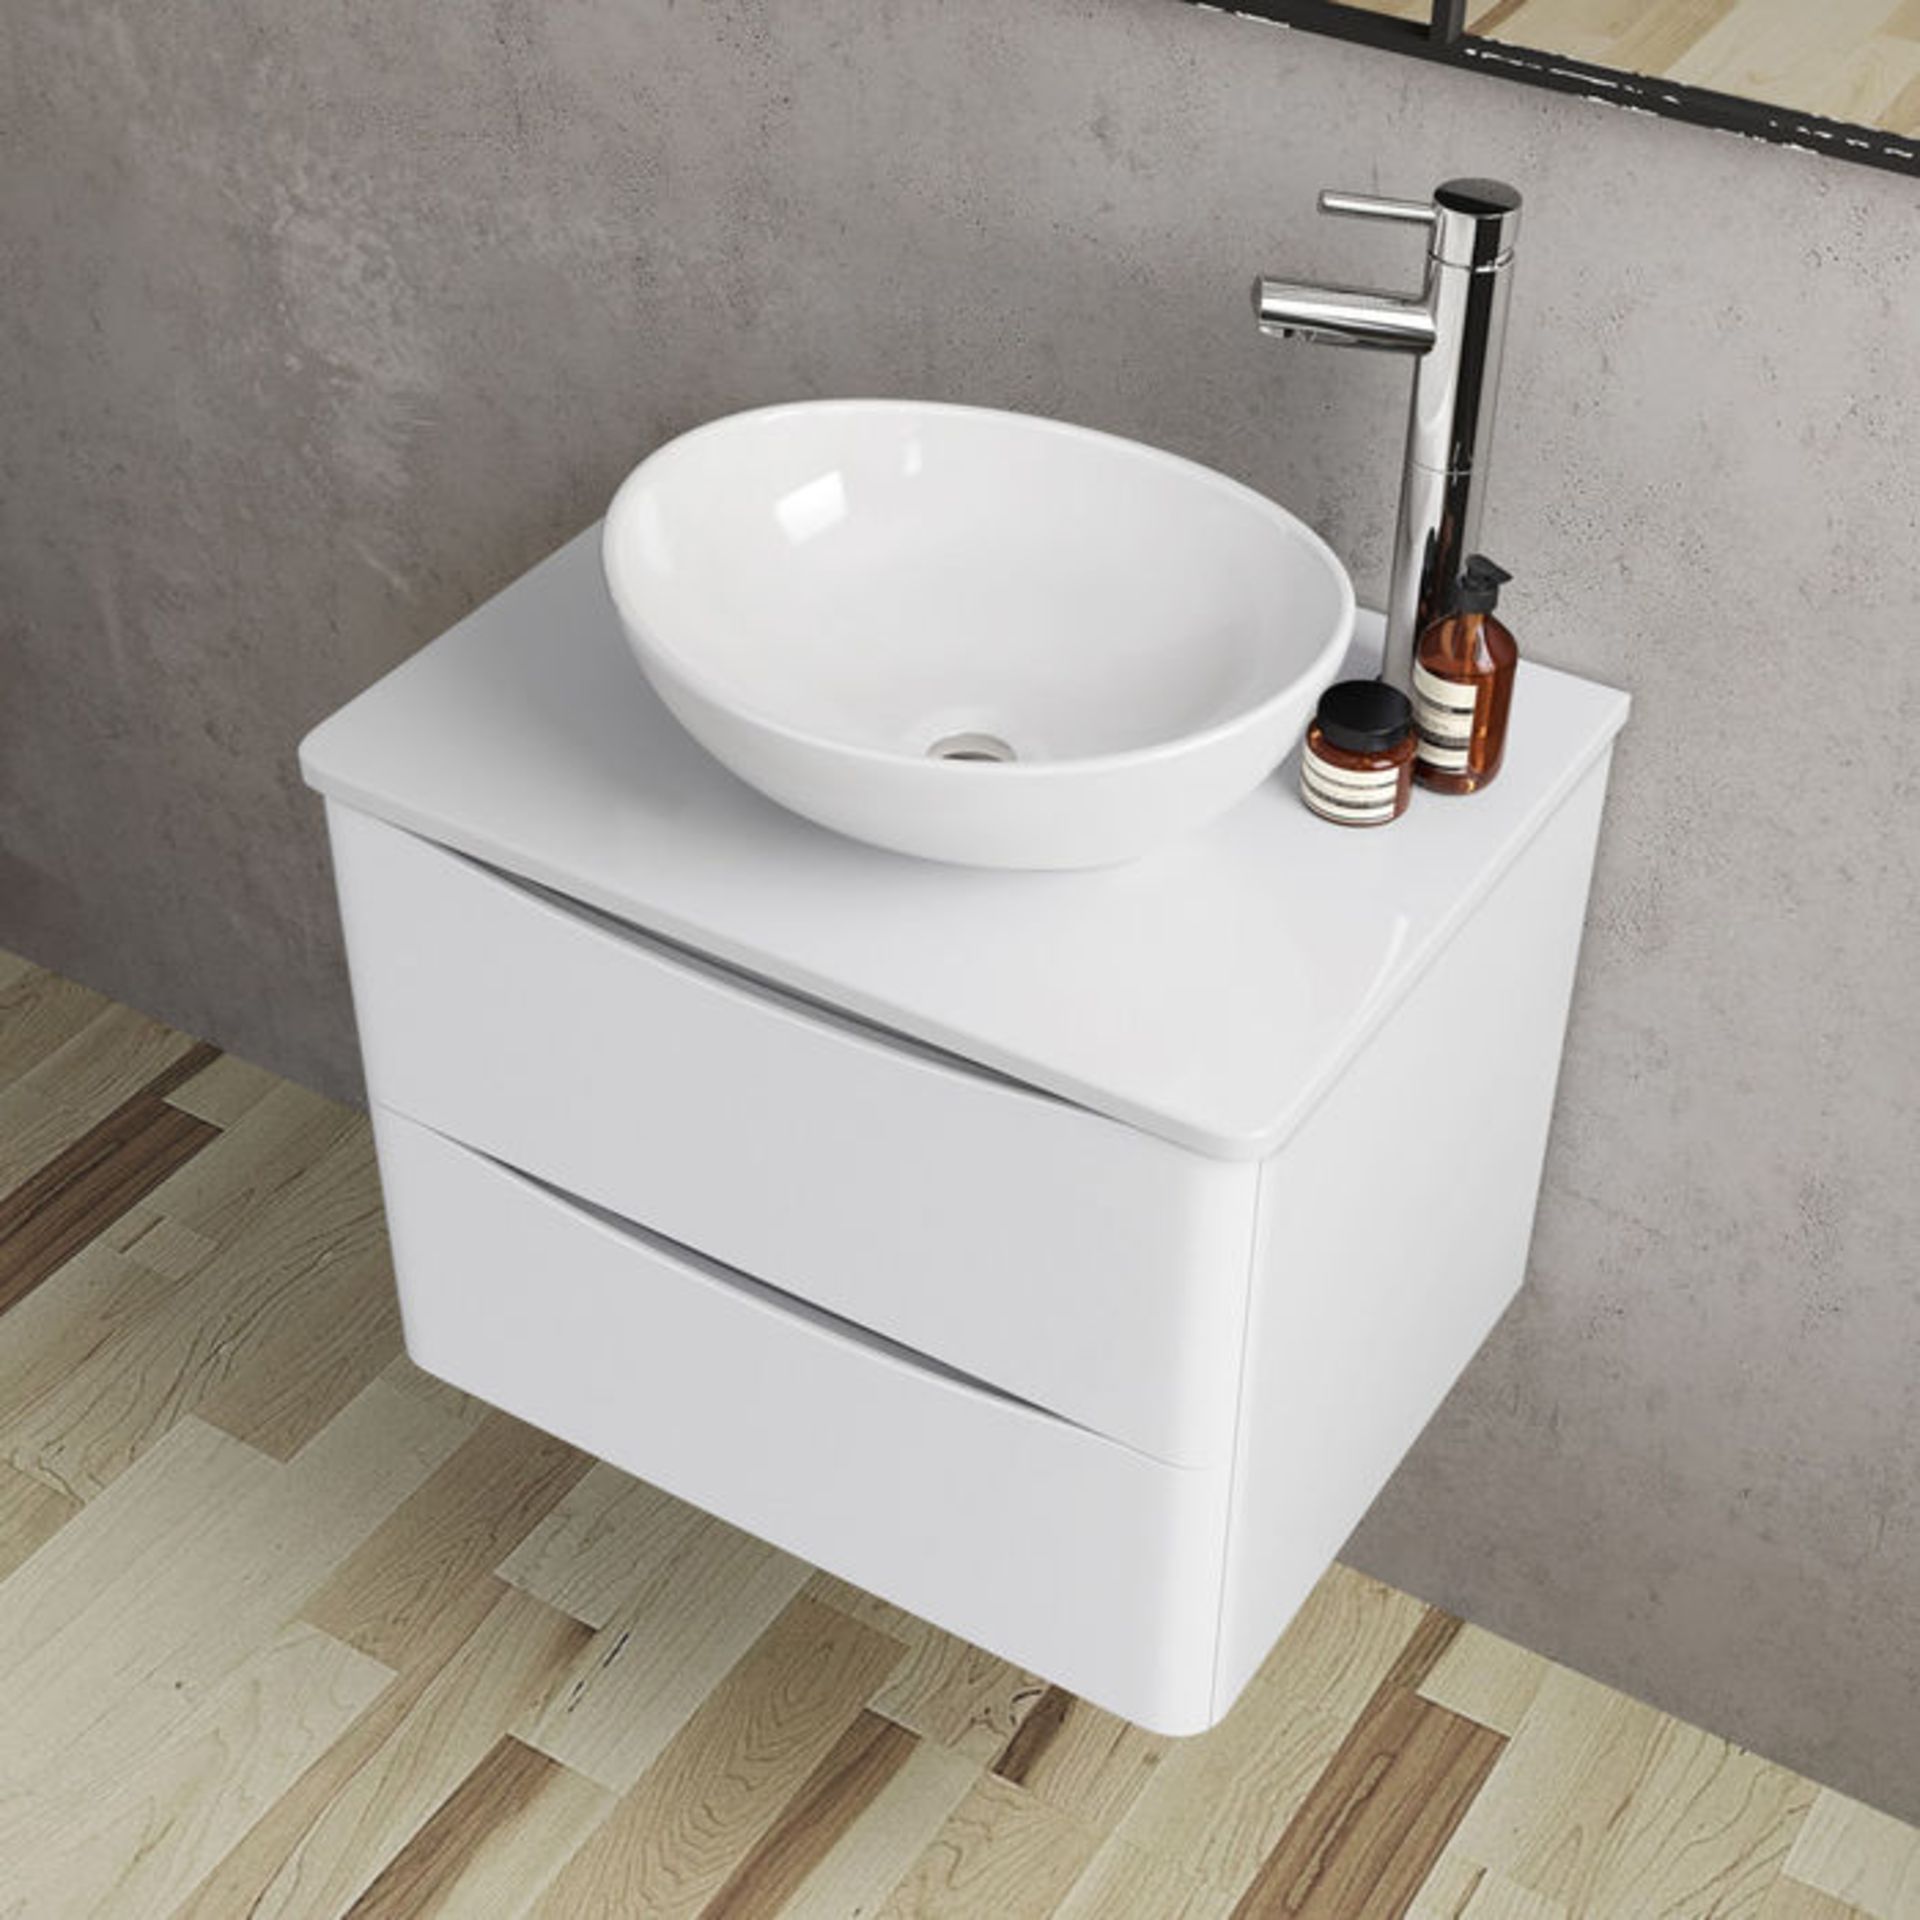 600mm Austin II Gloss White Countertop Unit and Camila Basin - Wall Hung. RRP £899.99.Comes co... - Image 2 of 3